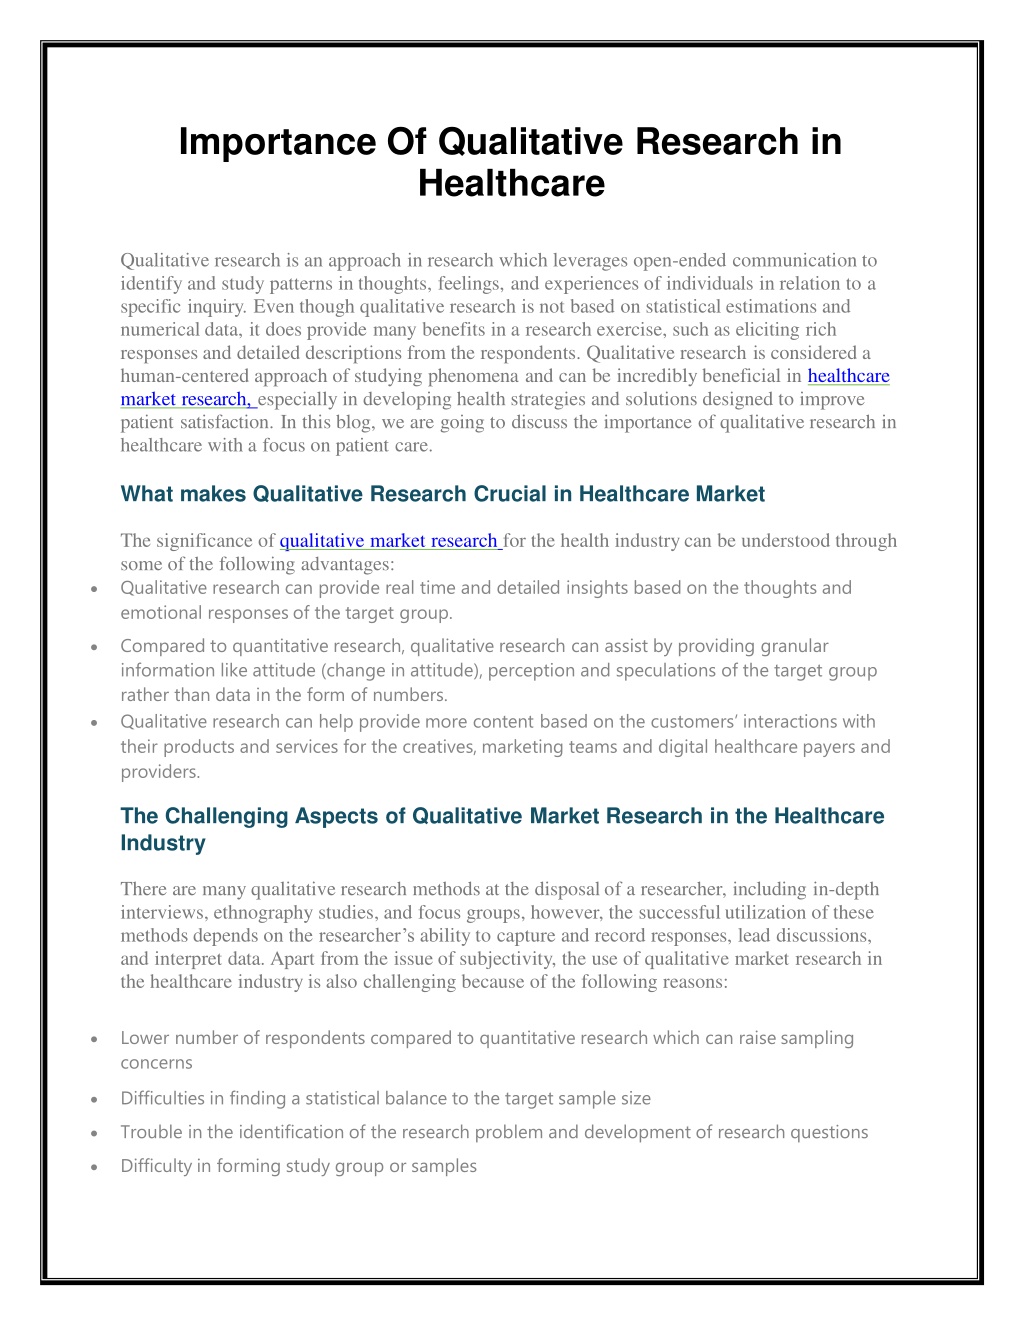 qualitative research in healthcare examples